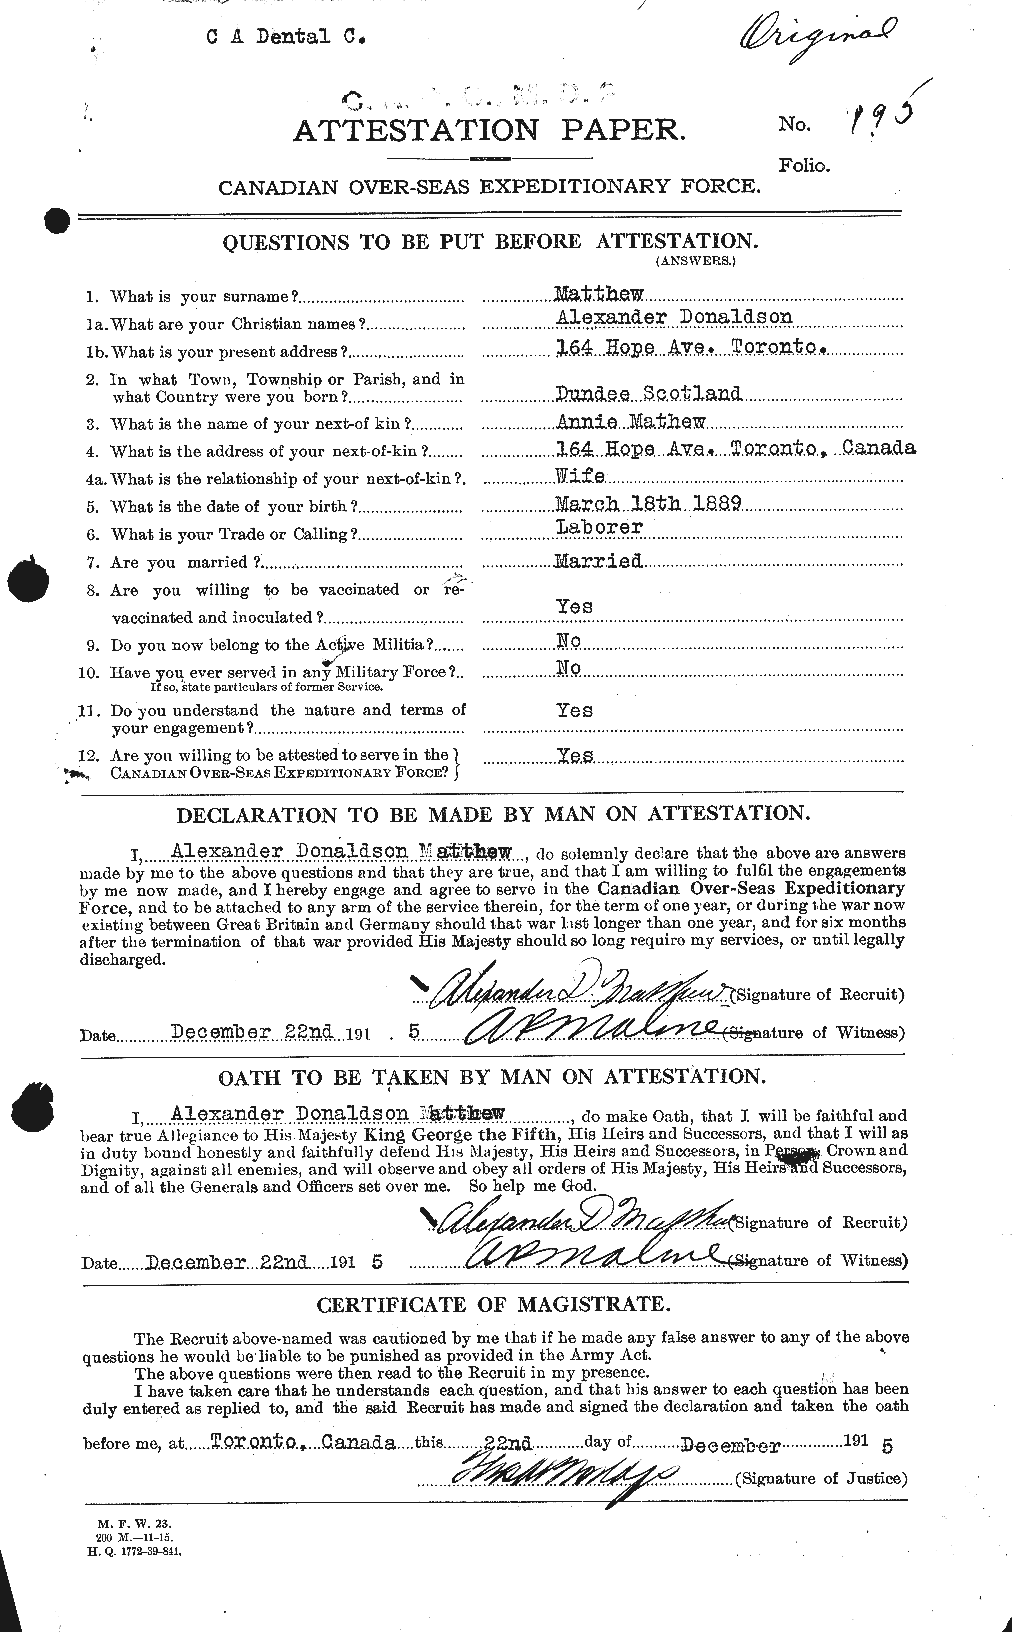 Personnel Records of the First World War - CEF 490222a